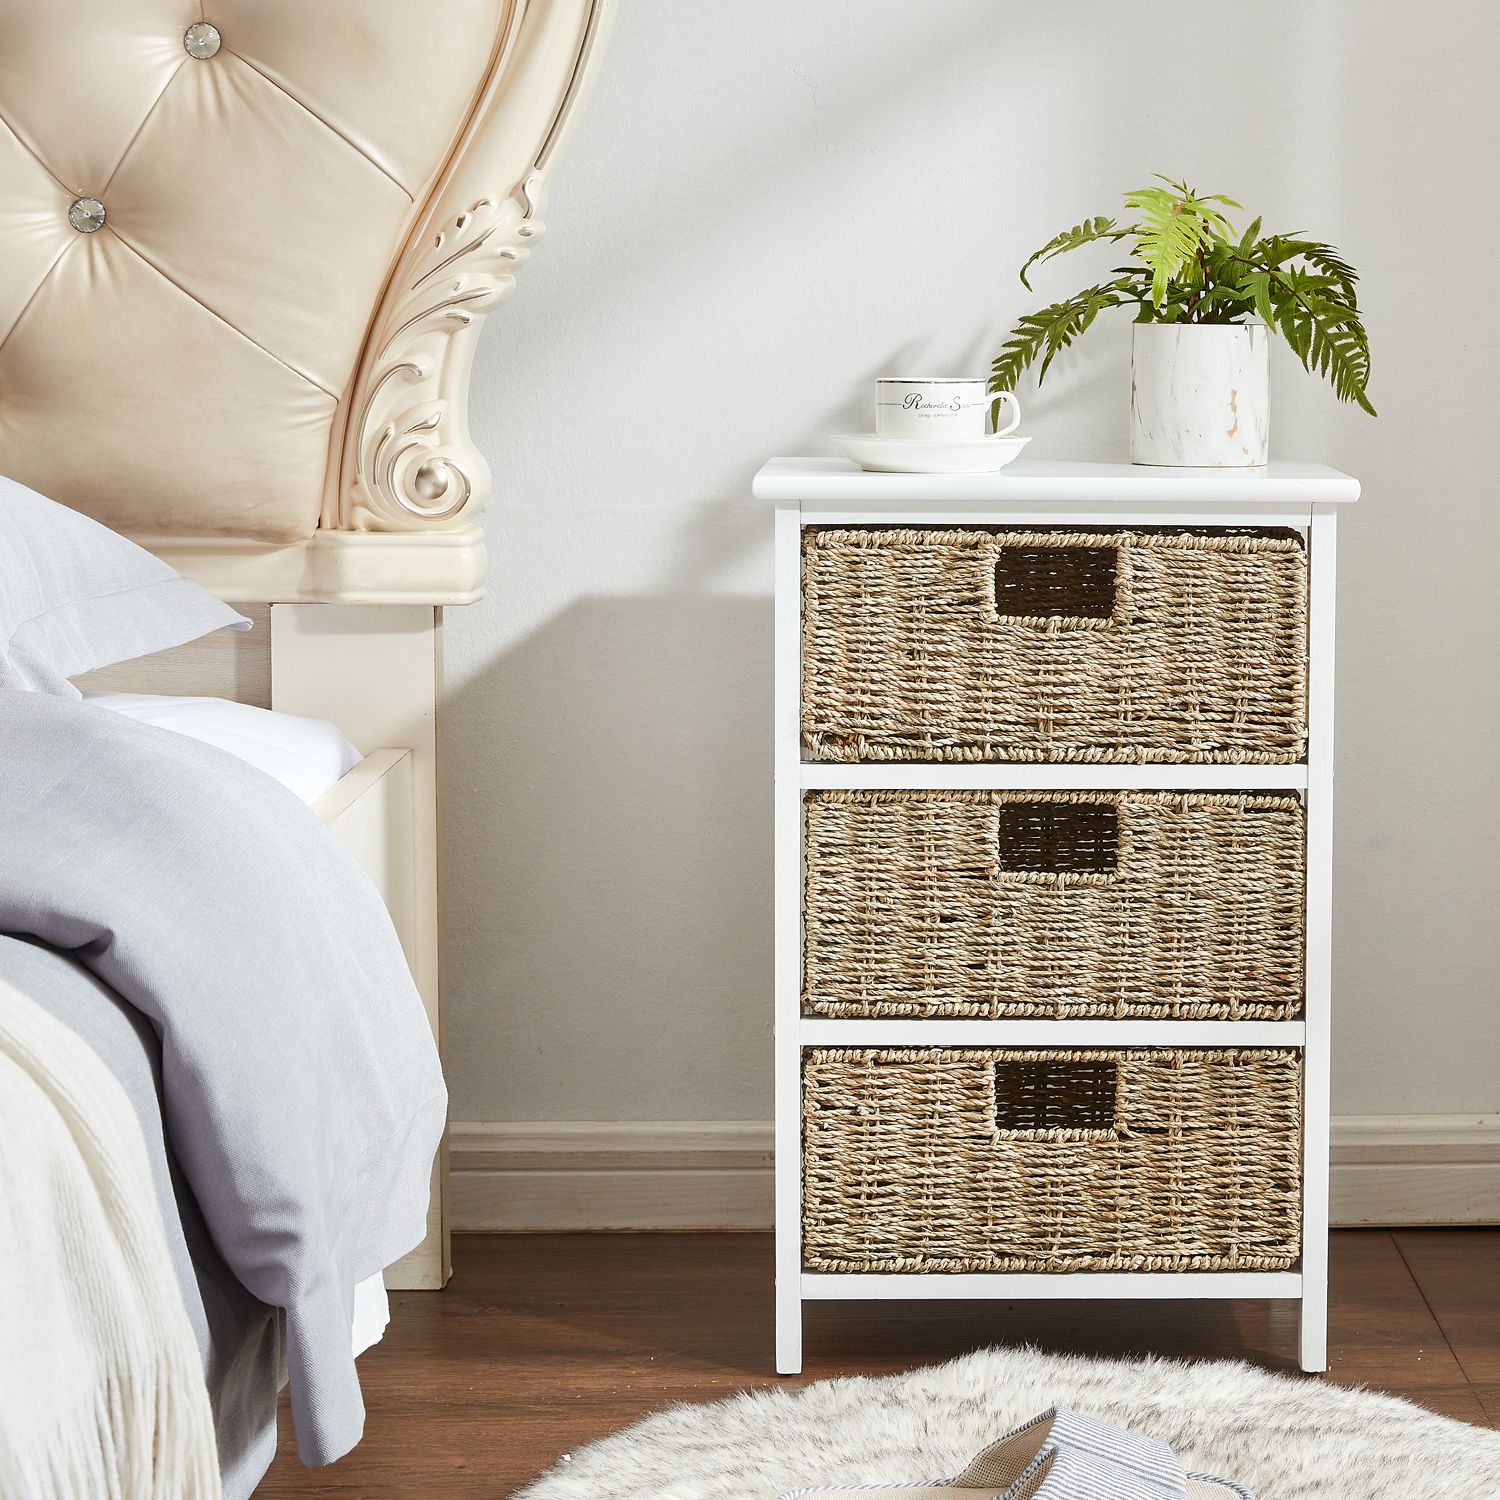 White Nightstand with 3 Drawers, Bedside Tables for Hallway, Accent End Table Bedroom,Dresser Storage Tower with Wood Top, Organizer Unit for Closets, Easy Pull Basket Bins(Seaweed) - image 5 of 7